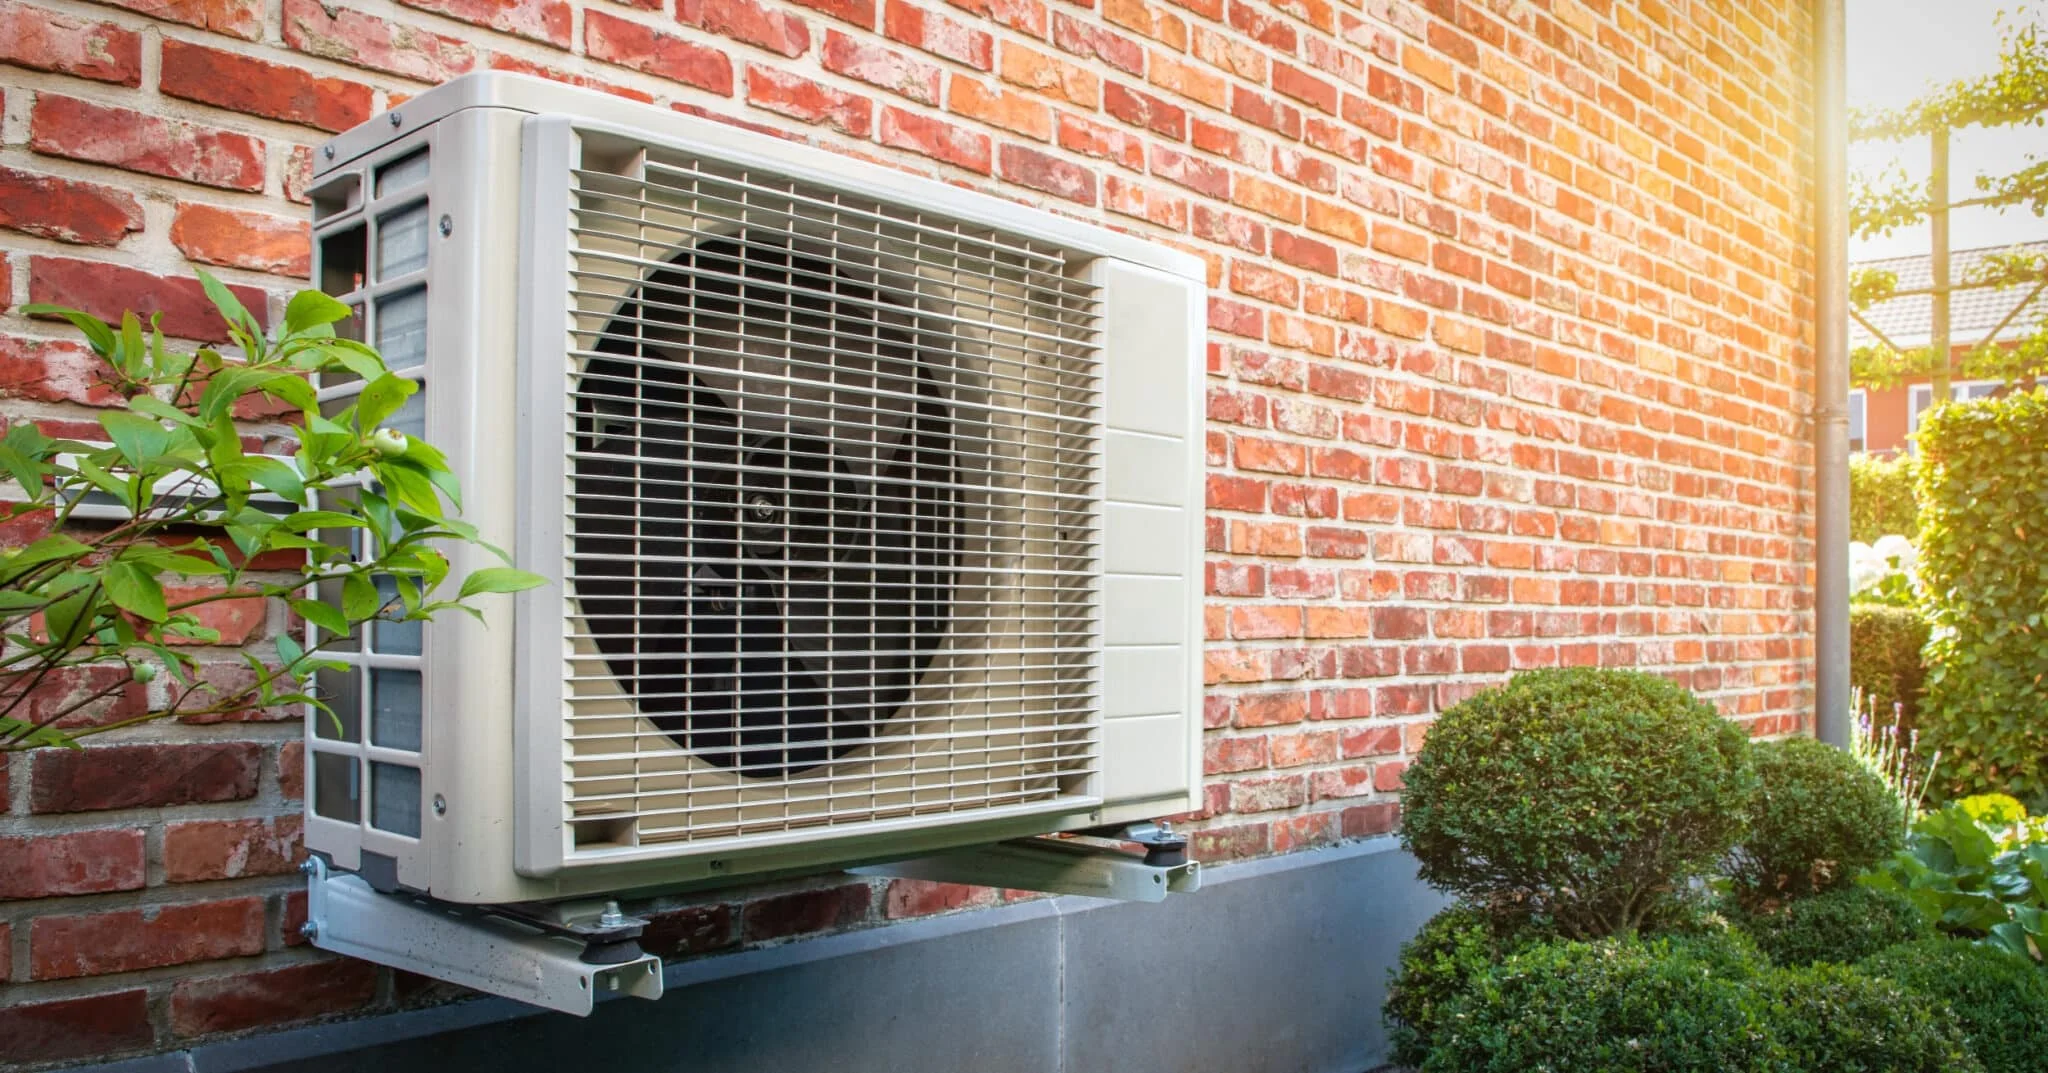 How Much Is A Heat Pump?